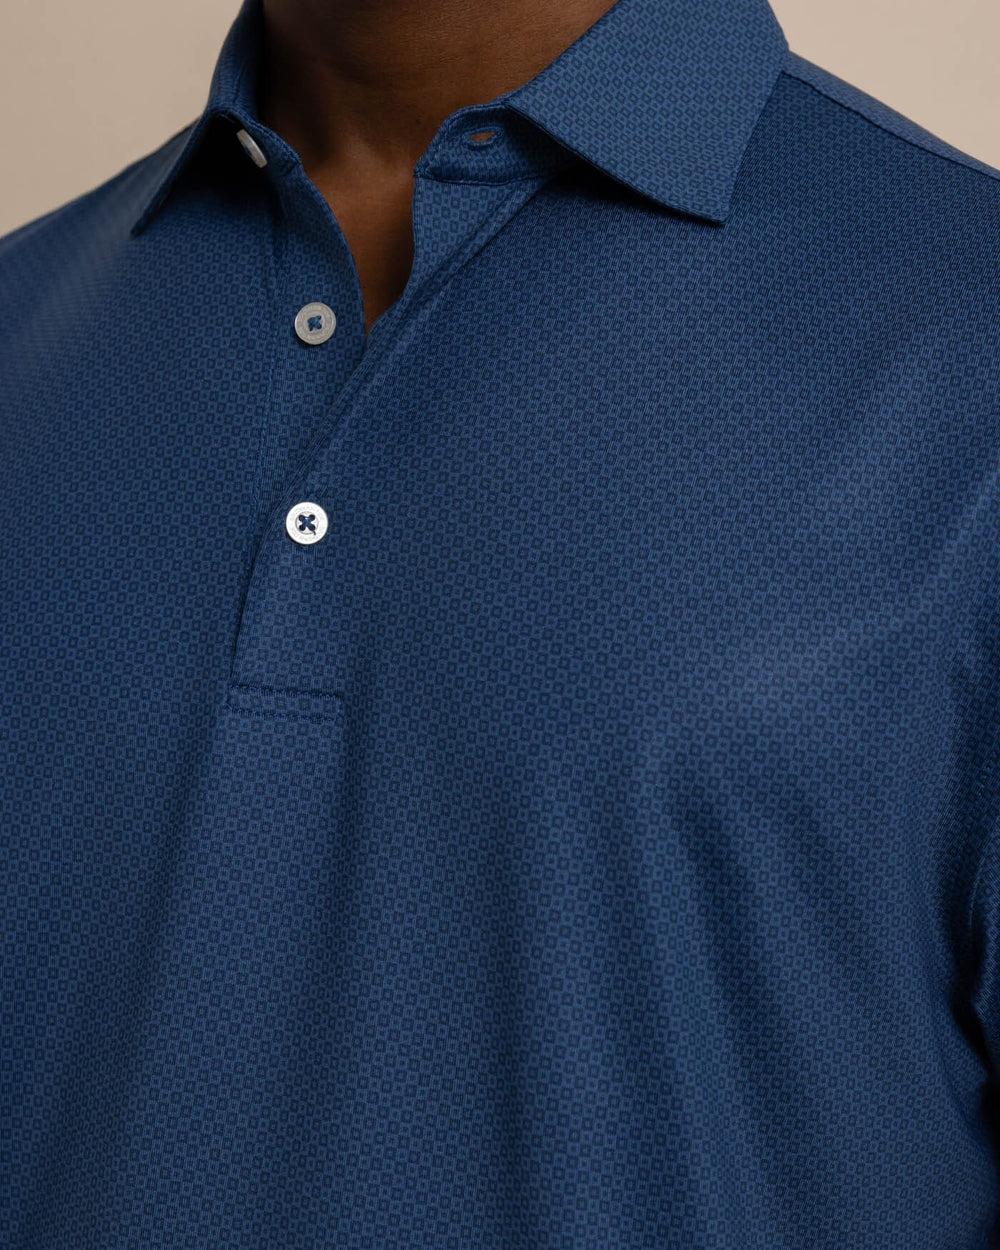 The detail view of the Southern Tide Driver Coastal Geo Polo Shirt by Southern Tide - Dress Blue